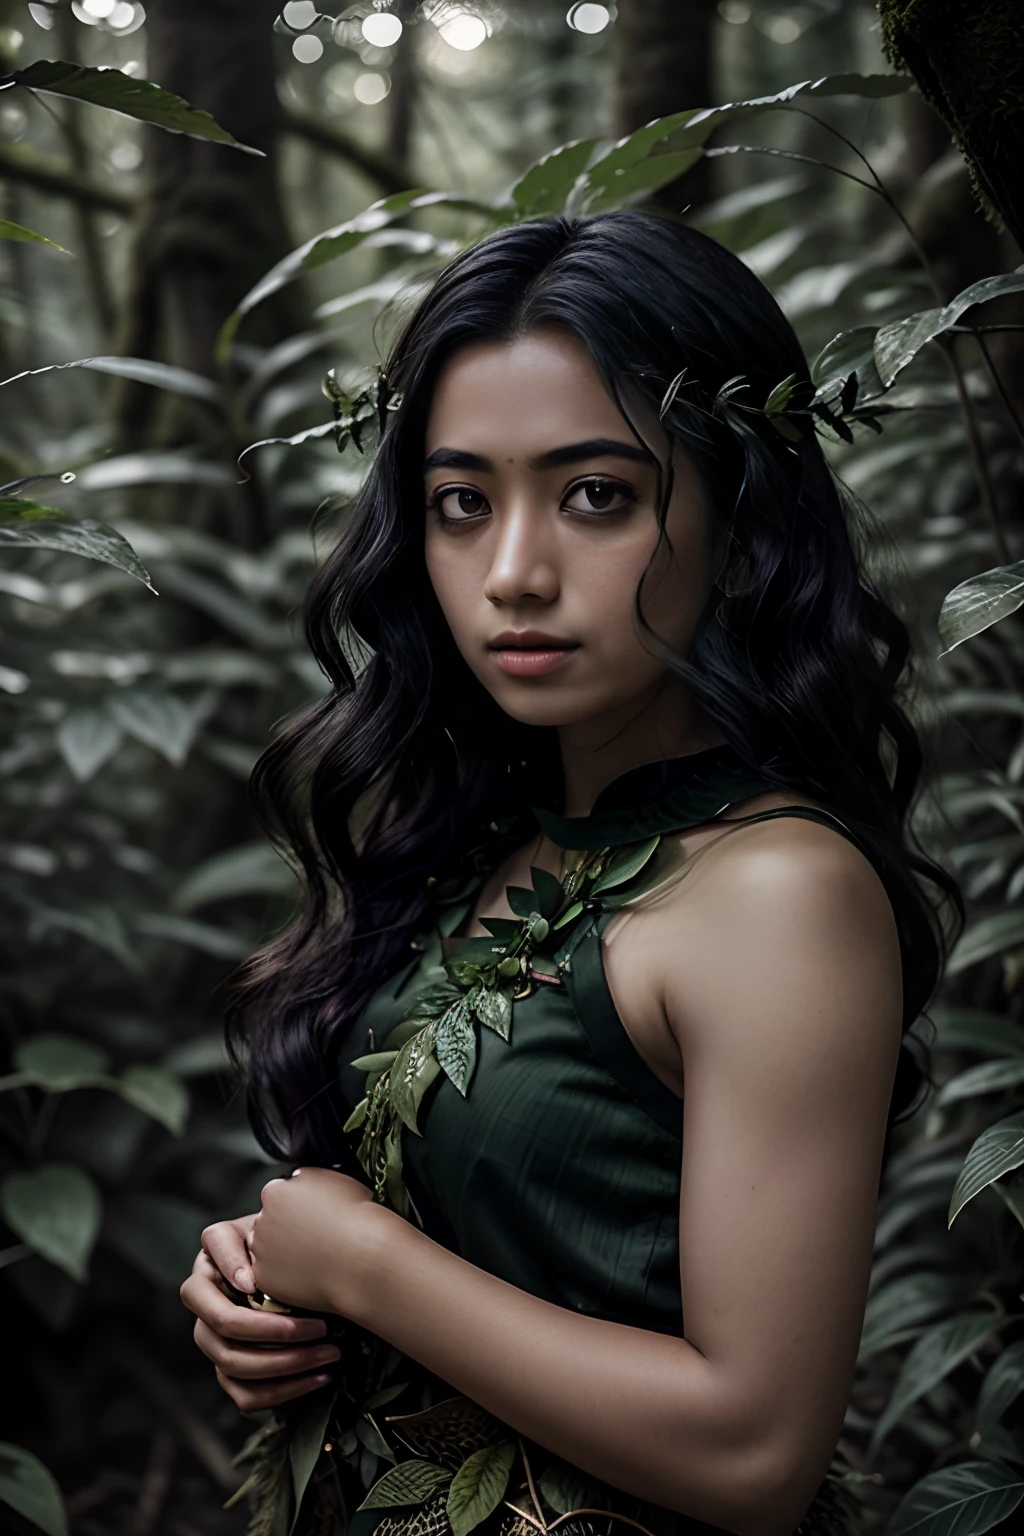 Portrait in forest, mother nature style leaves, hair made of green leaves, dreamlike, young black woman,indonesian, UHD, forest goddess, fairy, dark green clothing, forest, falling leaves, particles, best quality, pose, upper body, looking at the viewer, tetroilluminated, rimlight, beautiful artwork, perfect composition